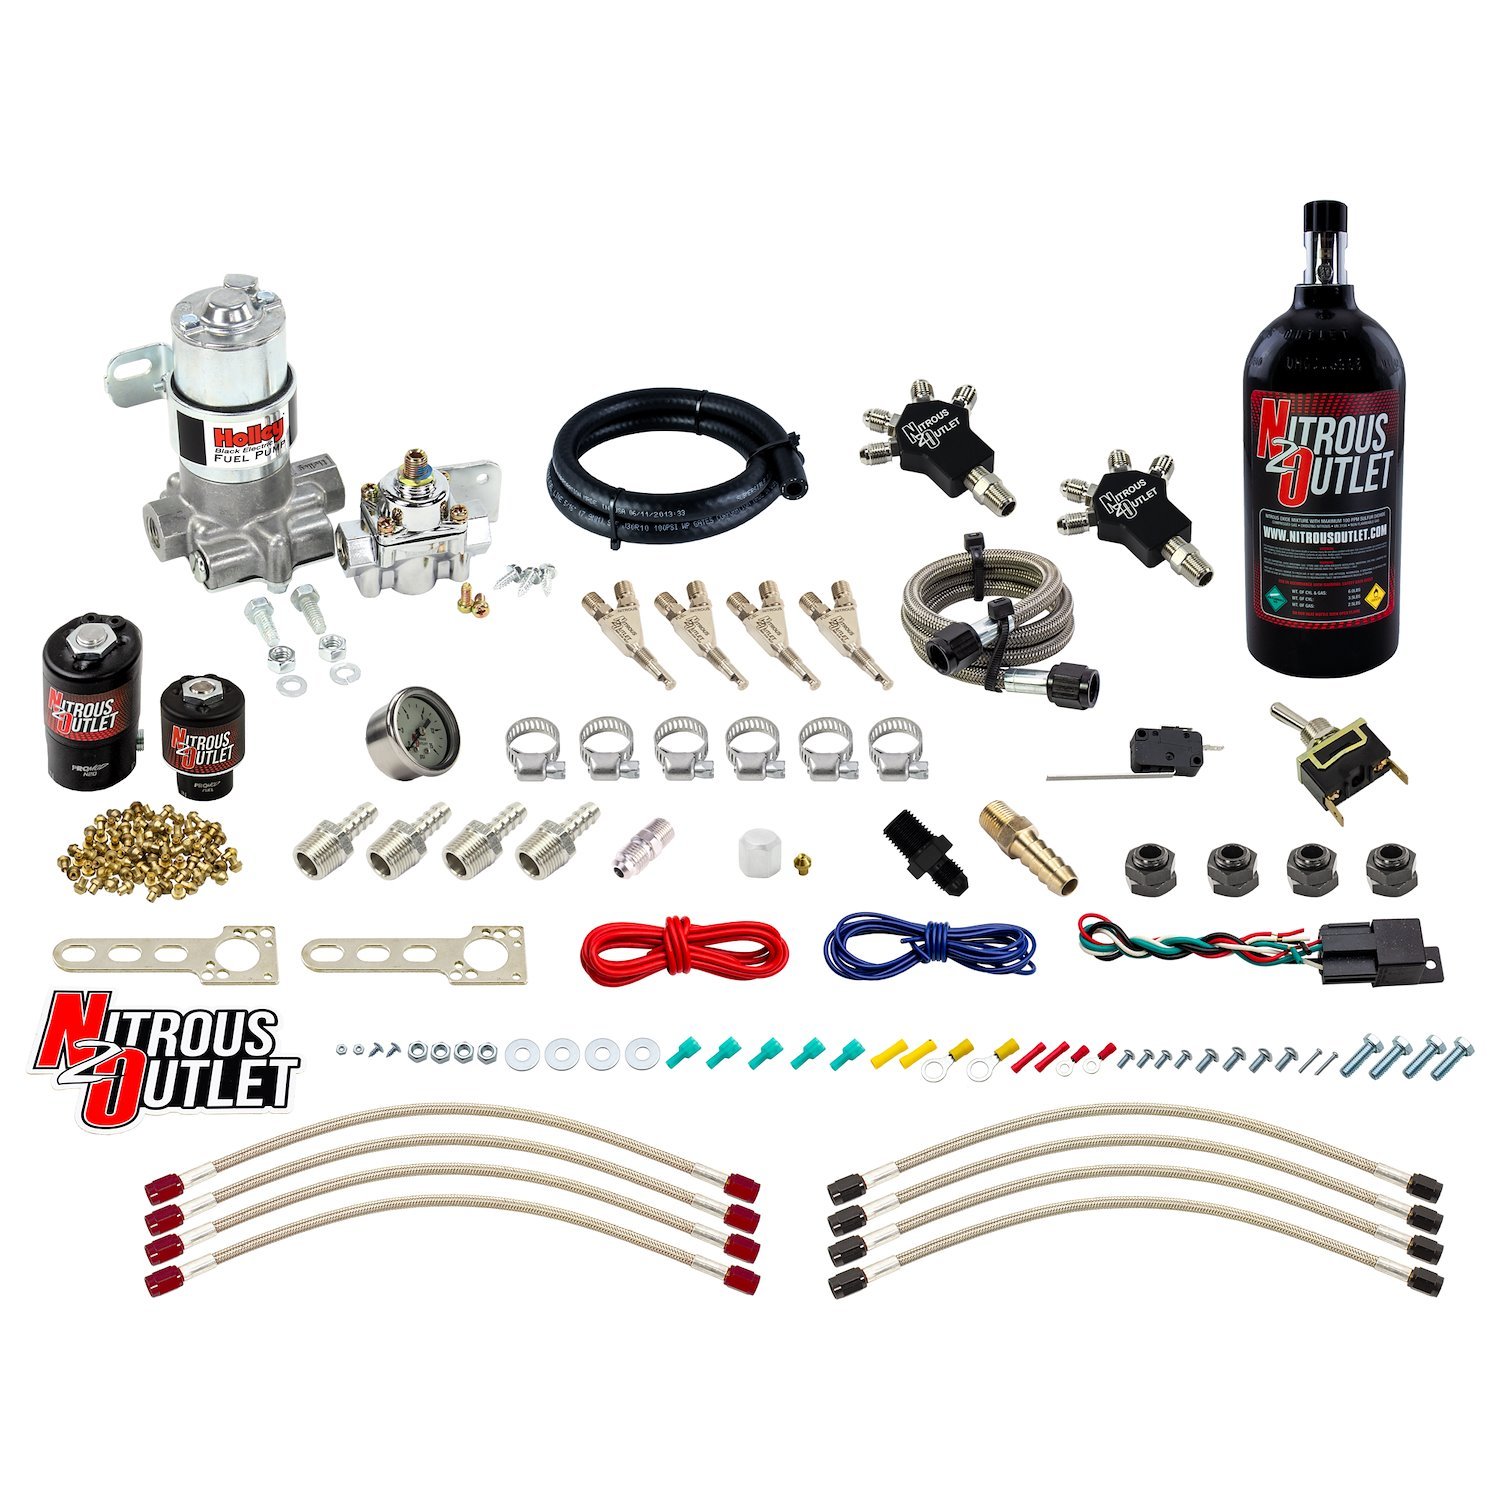 50-10200-2.5 Powersports 4-Cyl Pro Mod Nozzle System, Stainless 90-Degree Nozzles, Gas, 10 psi, 2.5LB Bot